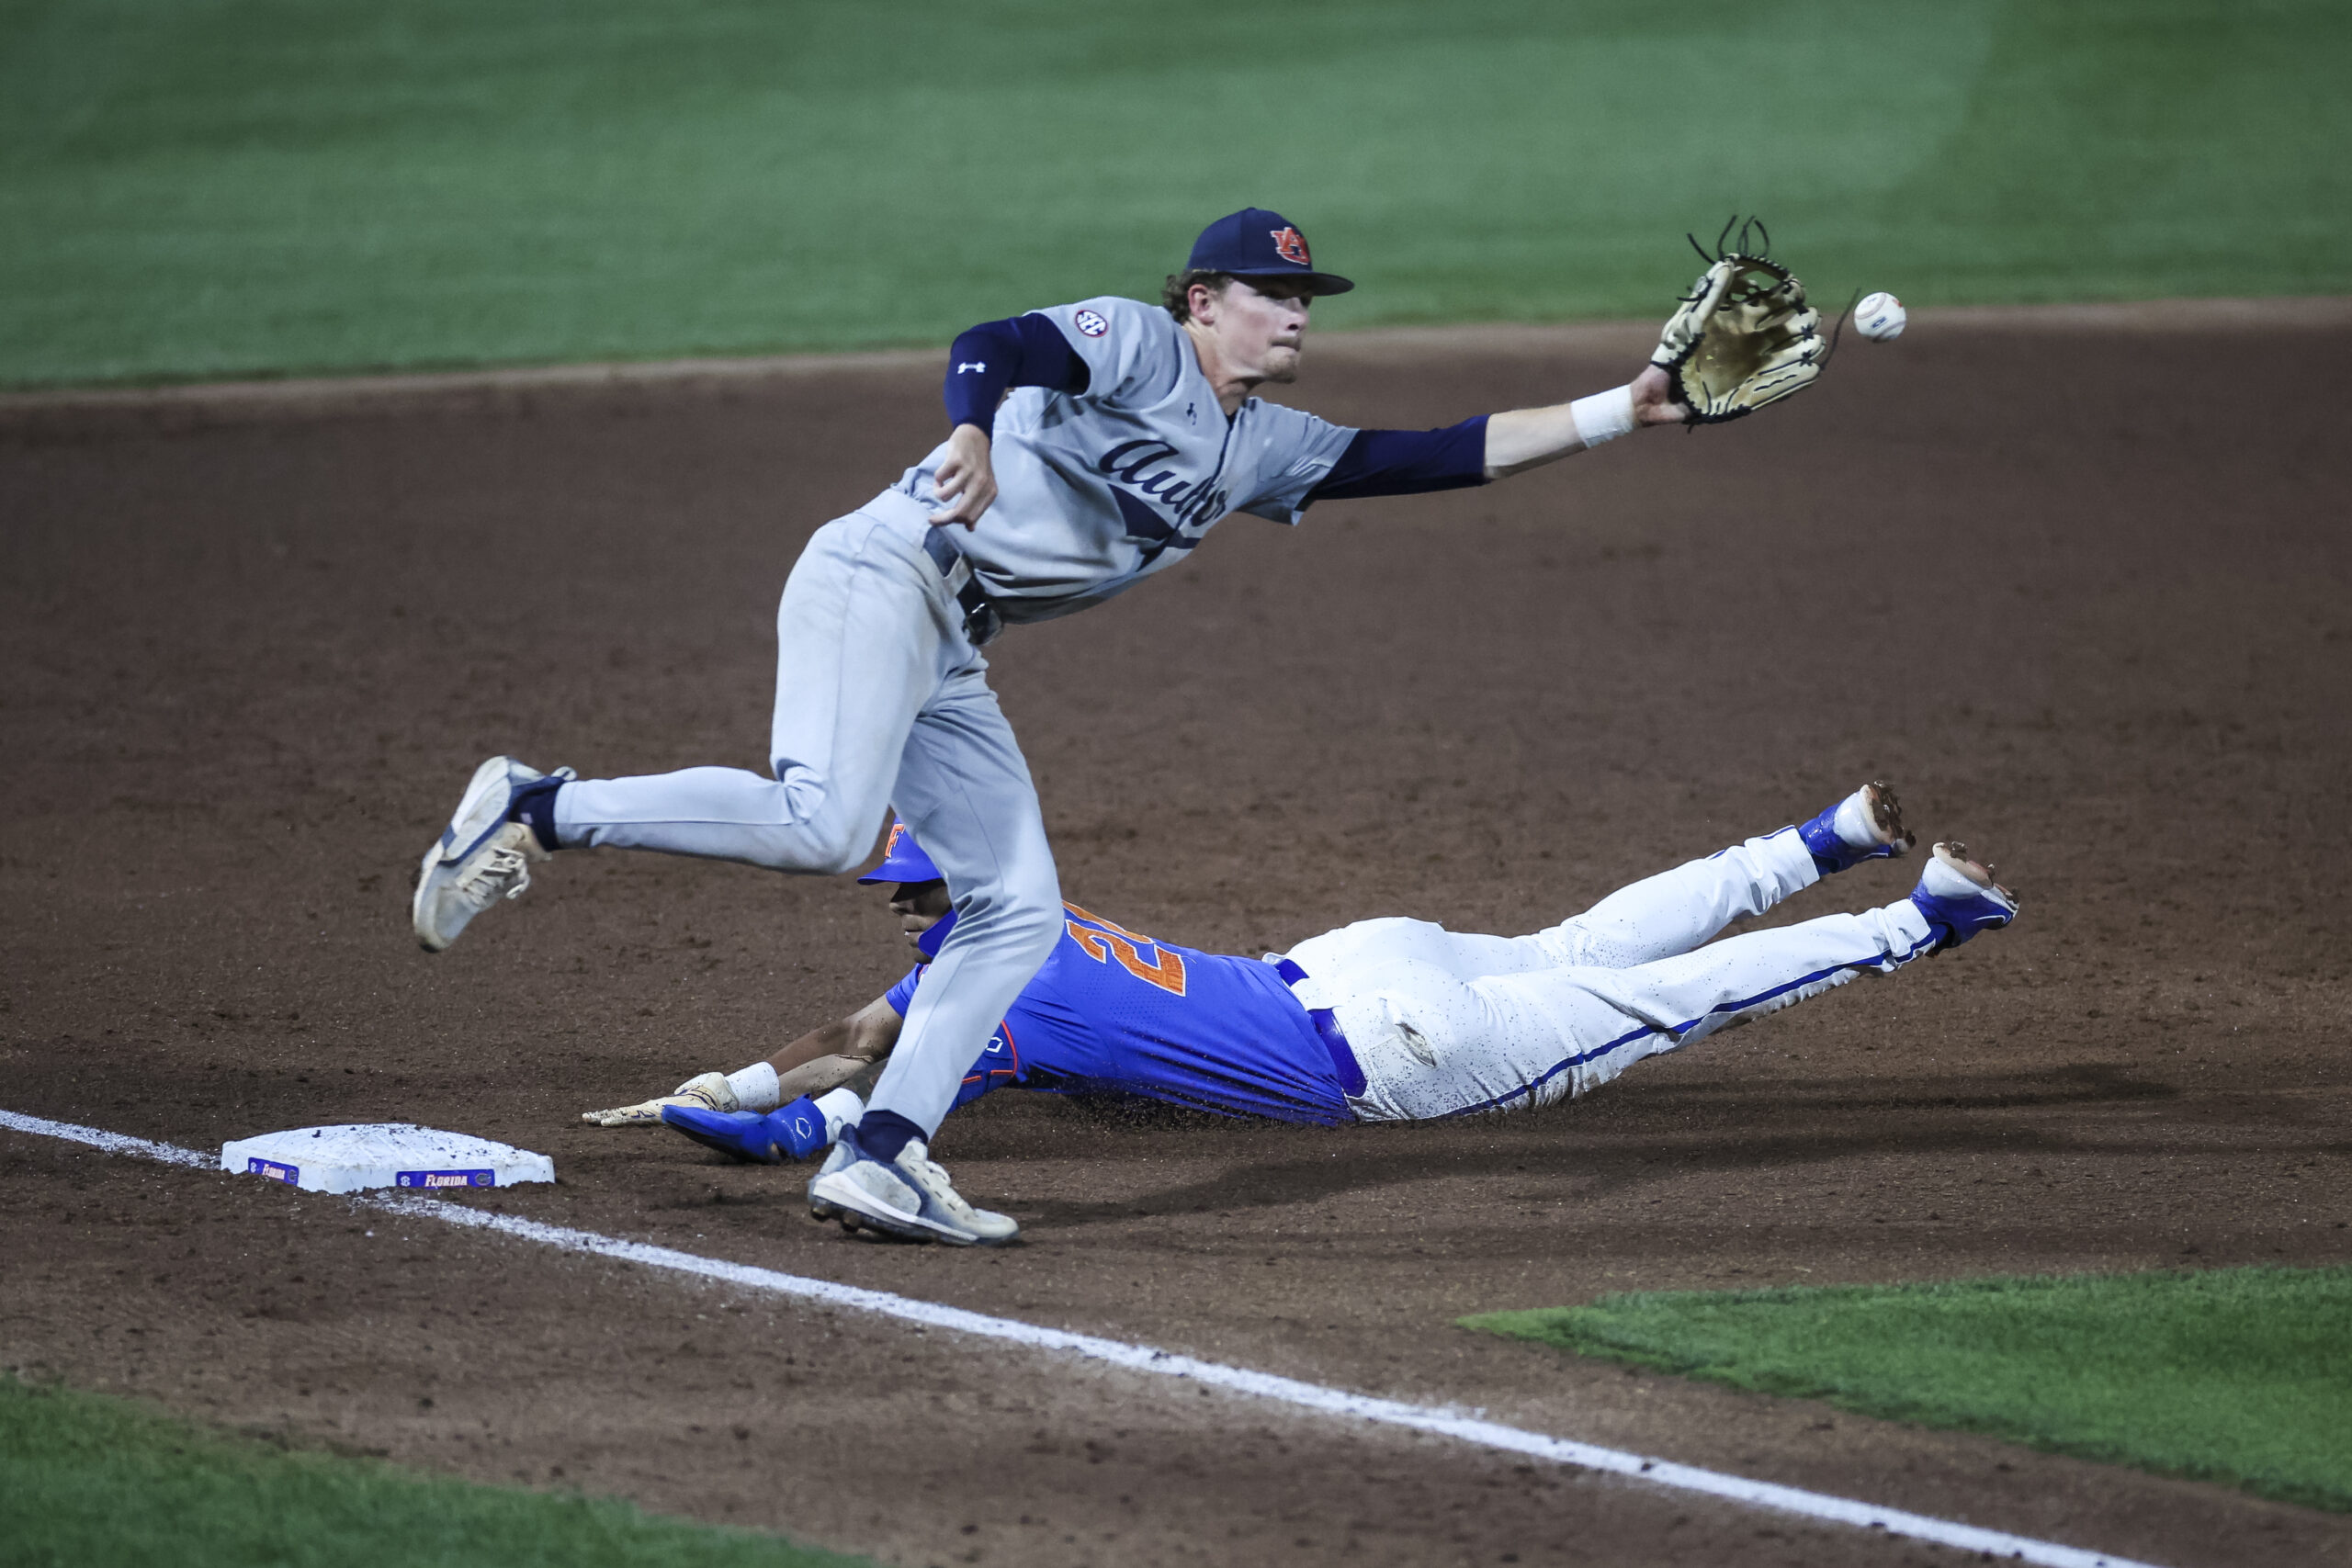 Gators blow by Auburn in game two, evens series